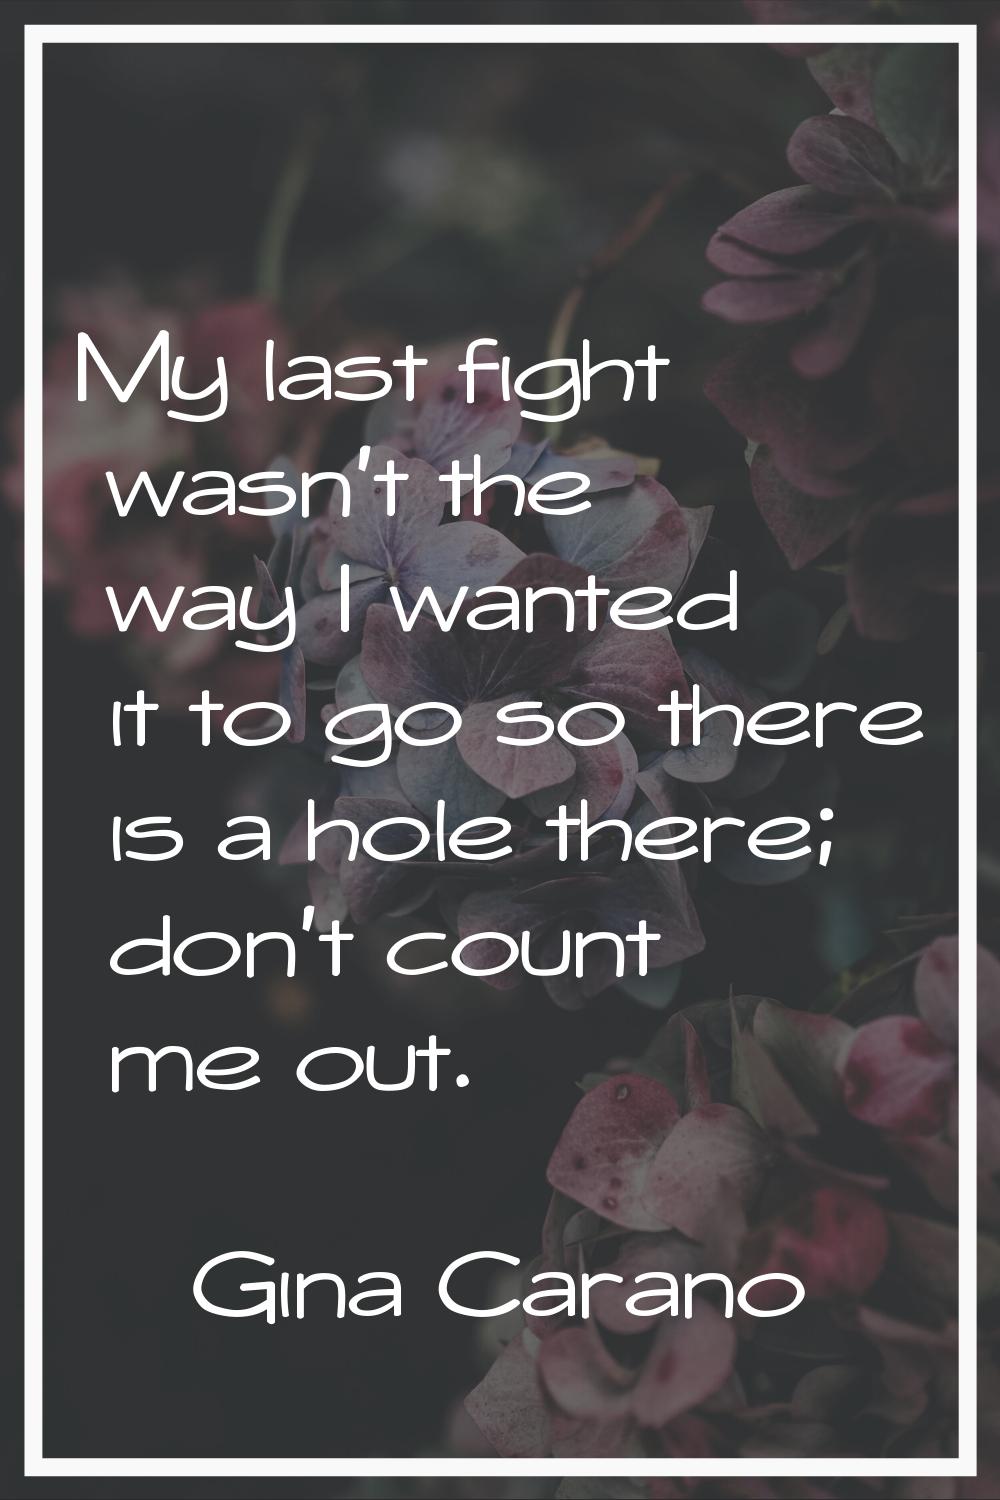 My last fight wasn't the way I wanted it to go so there is a hole there; don't count me out.